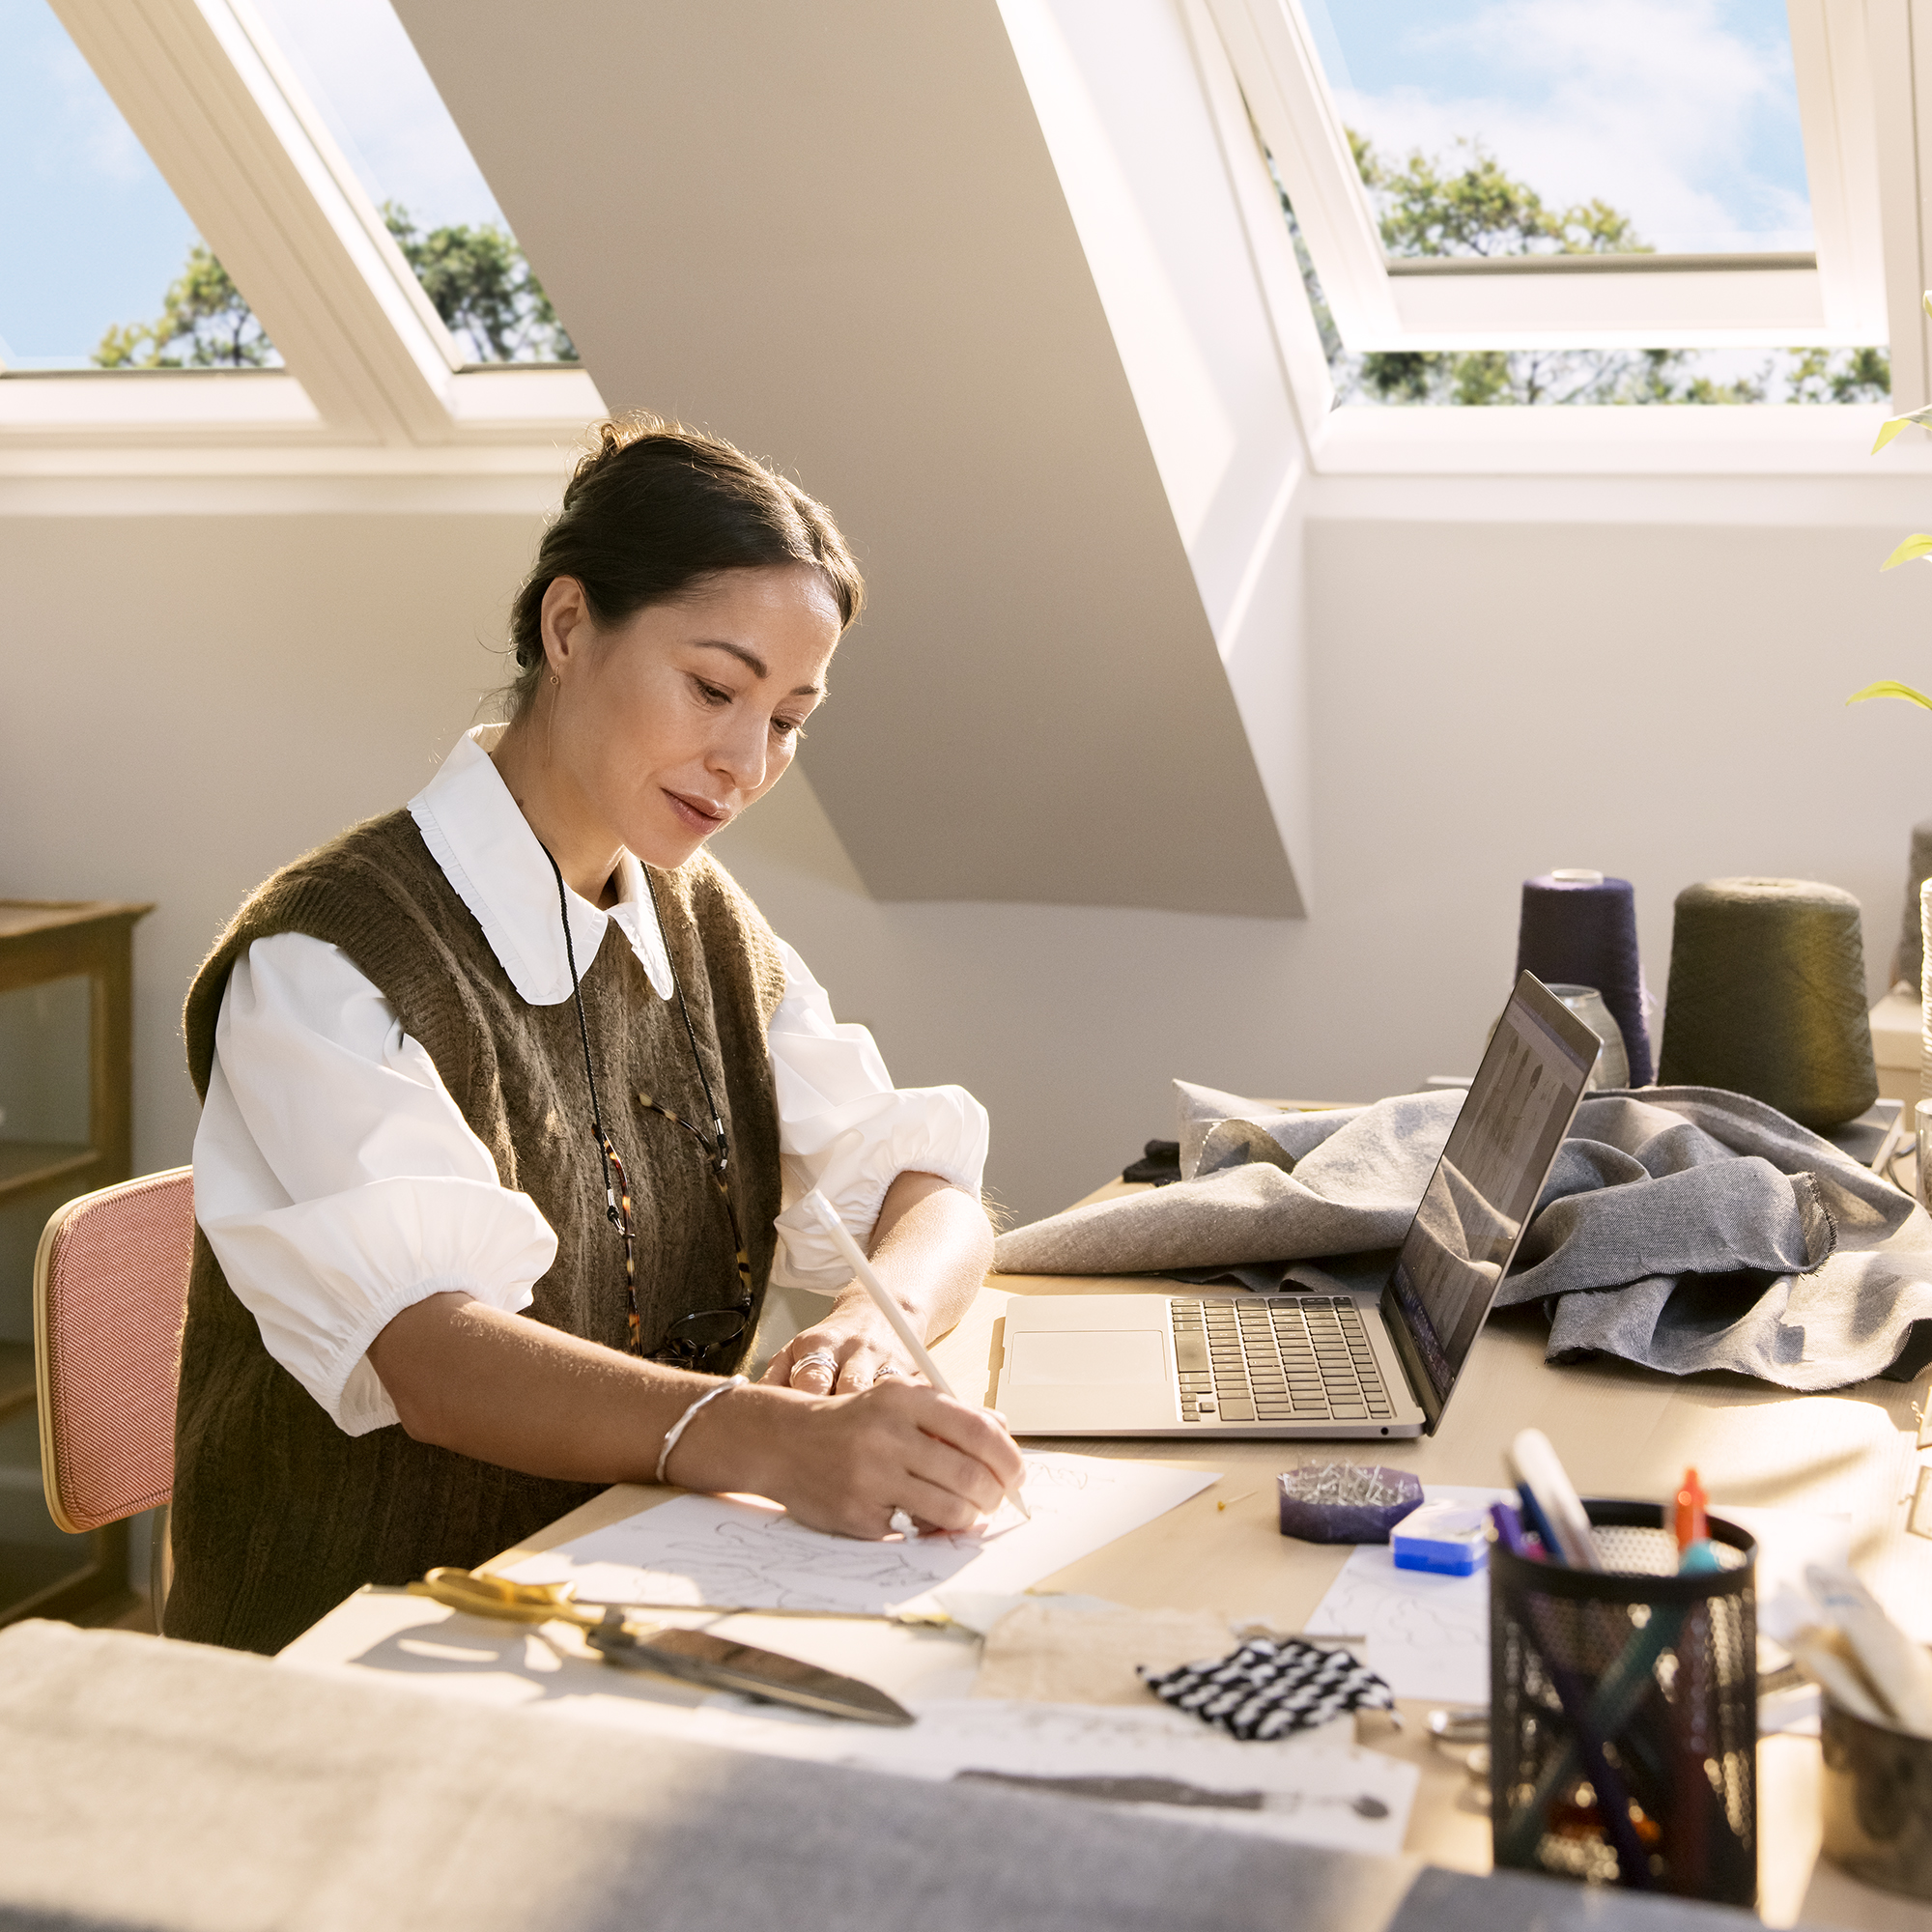 woman working at a desk with open roof lights